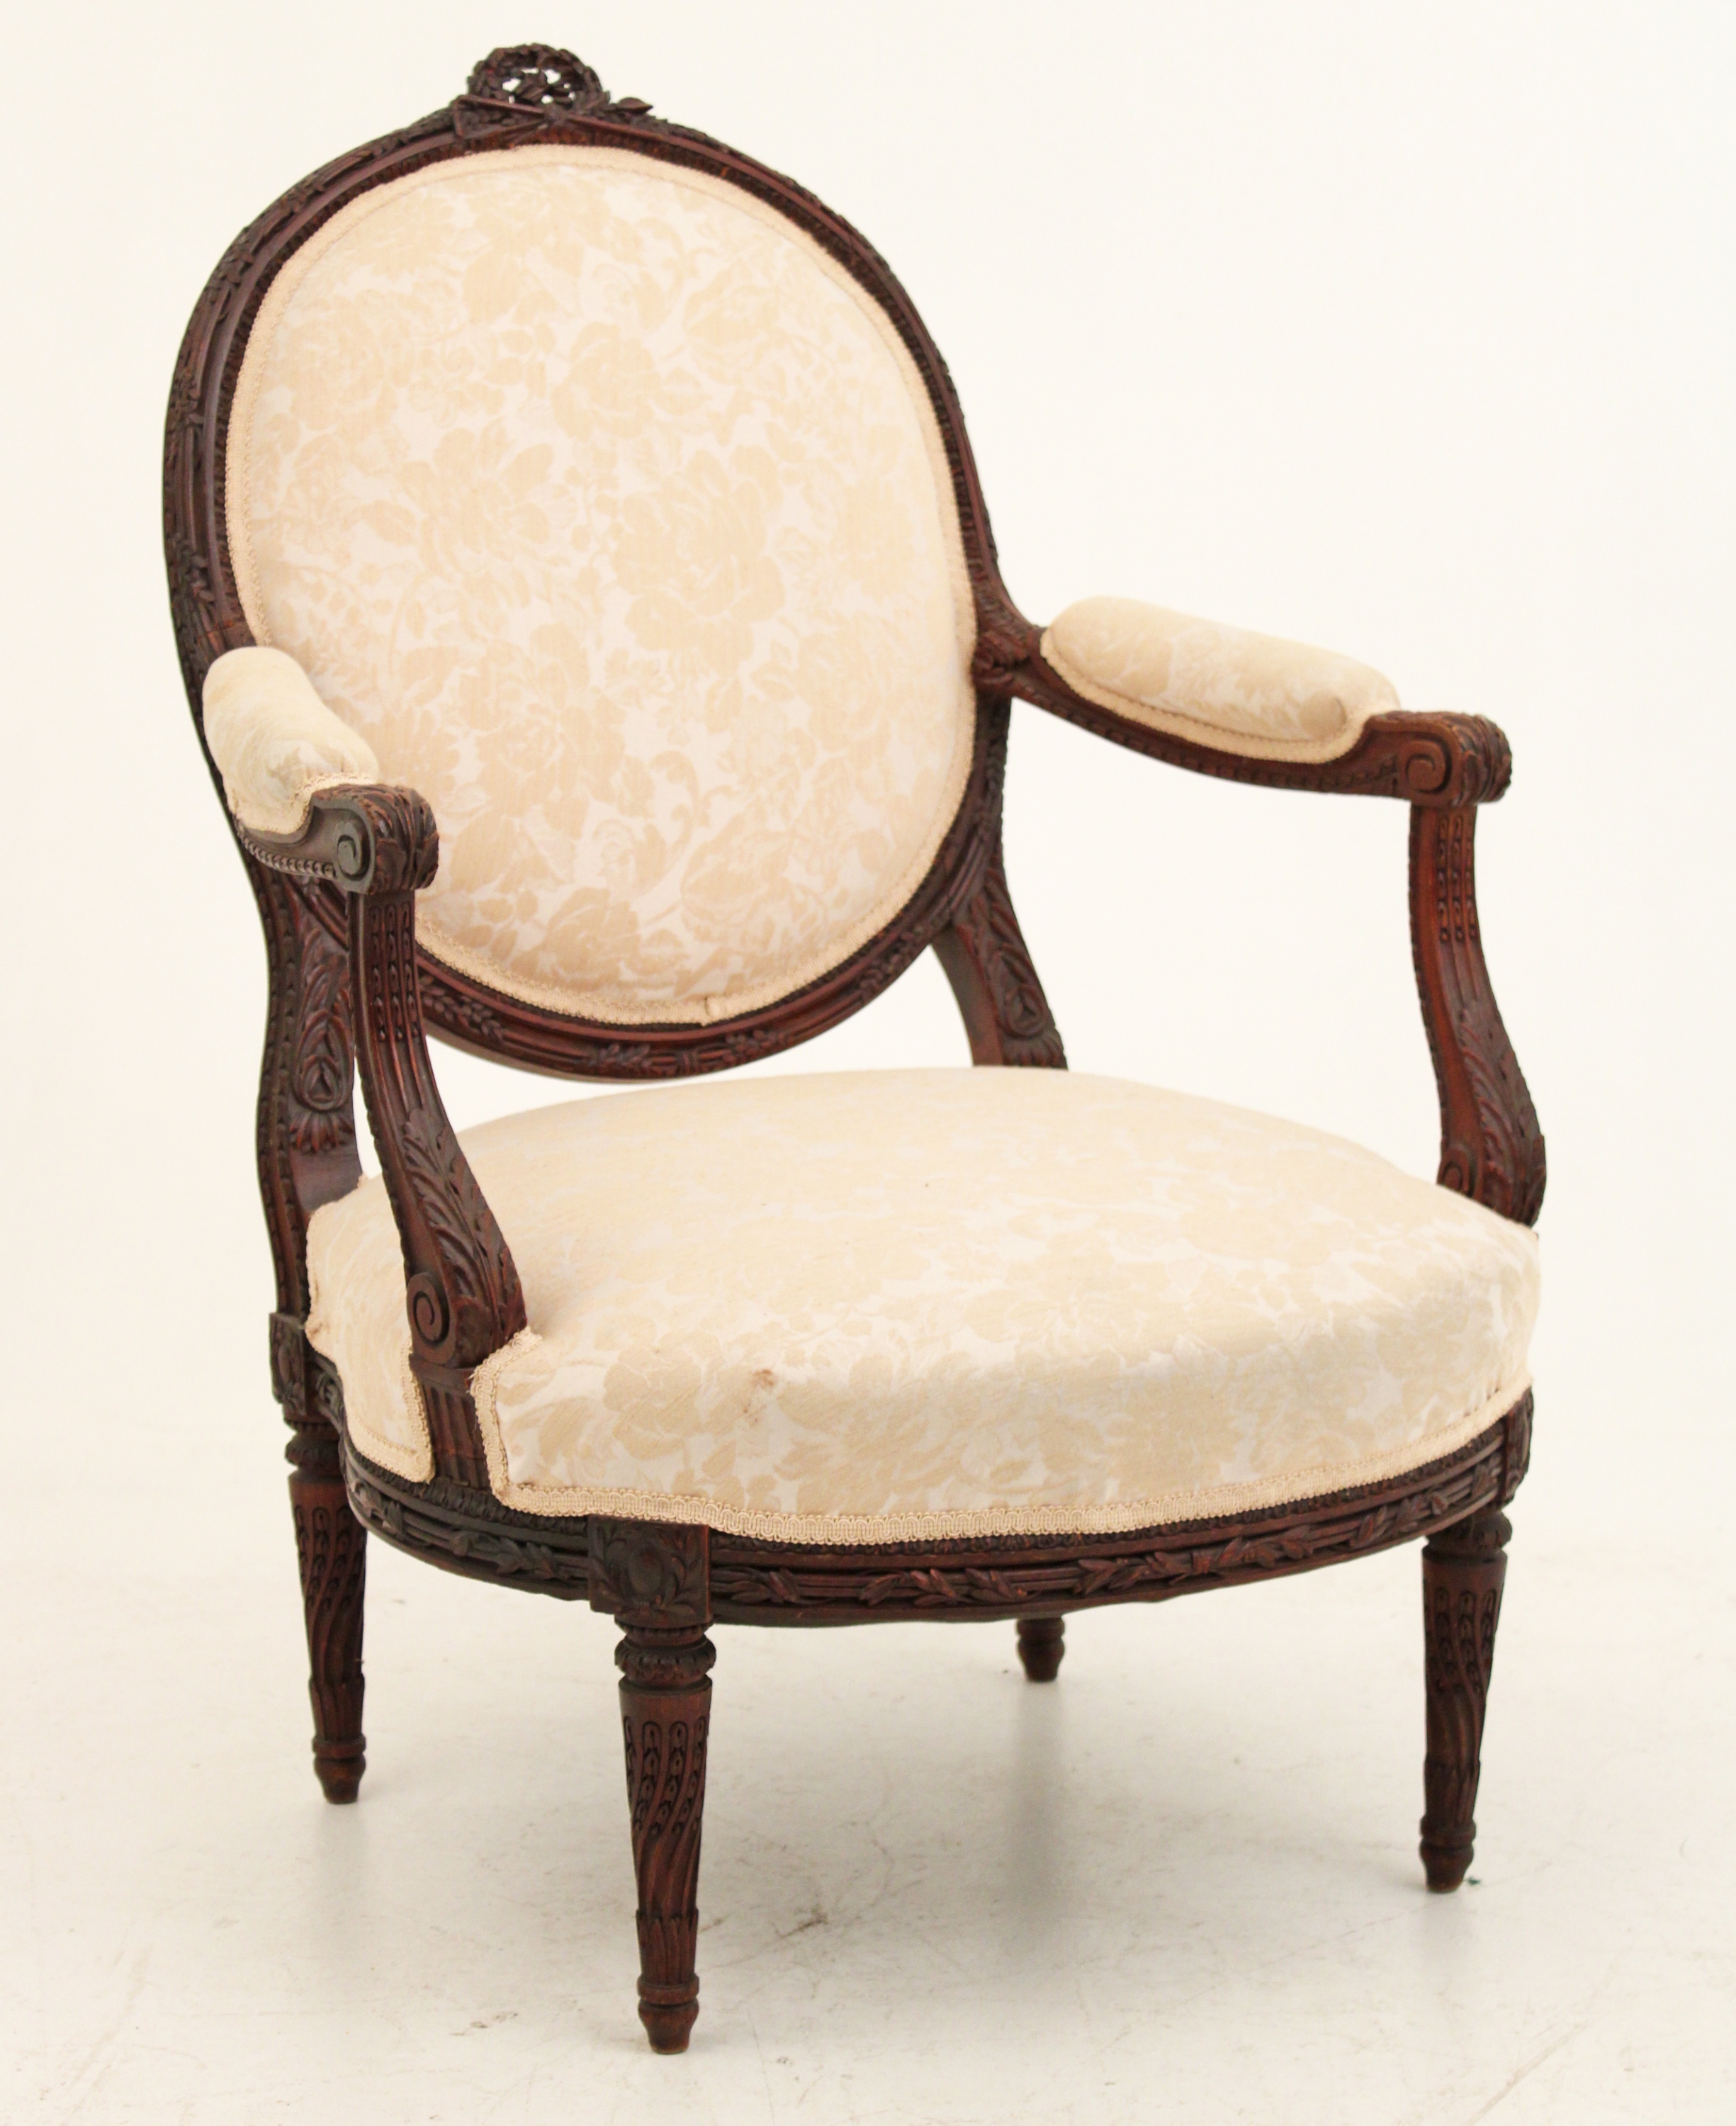 LOUIS XV STYLE CARVED WALNUT FAUTEUIL 2b79e4